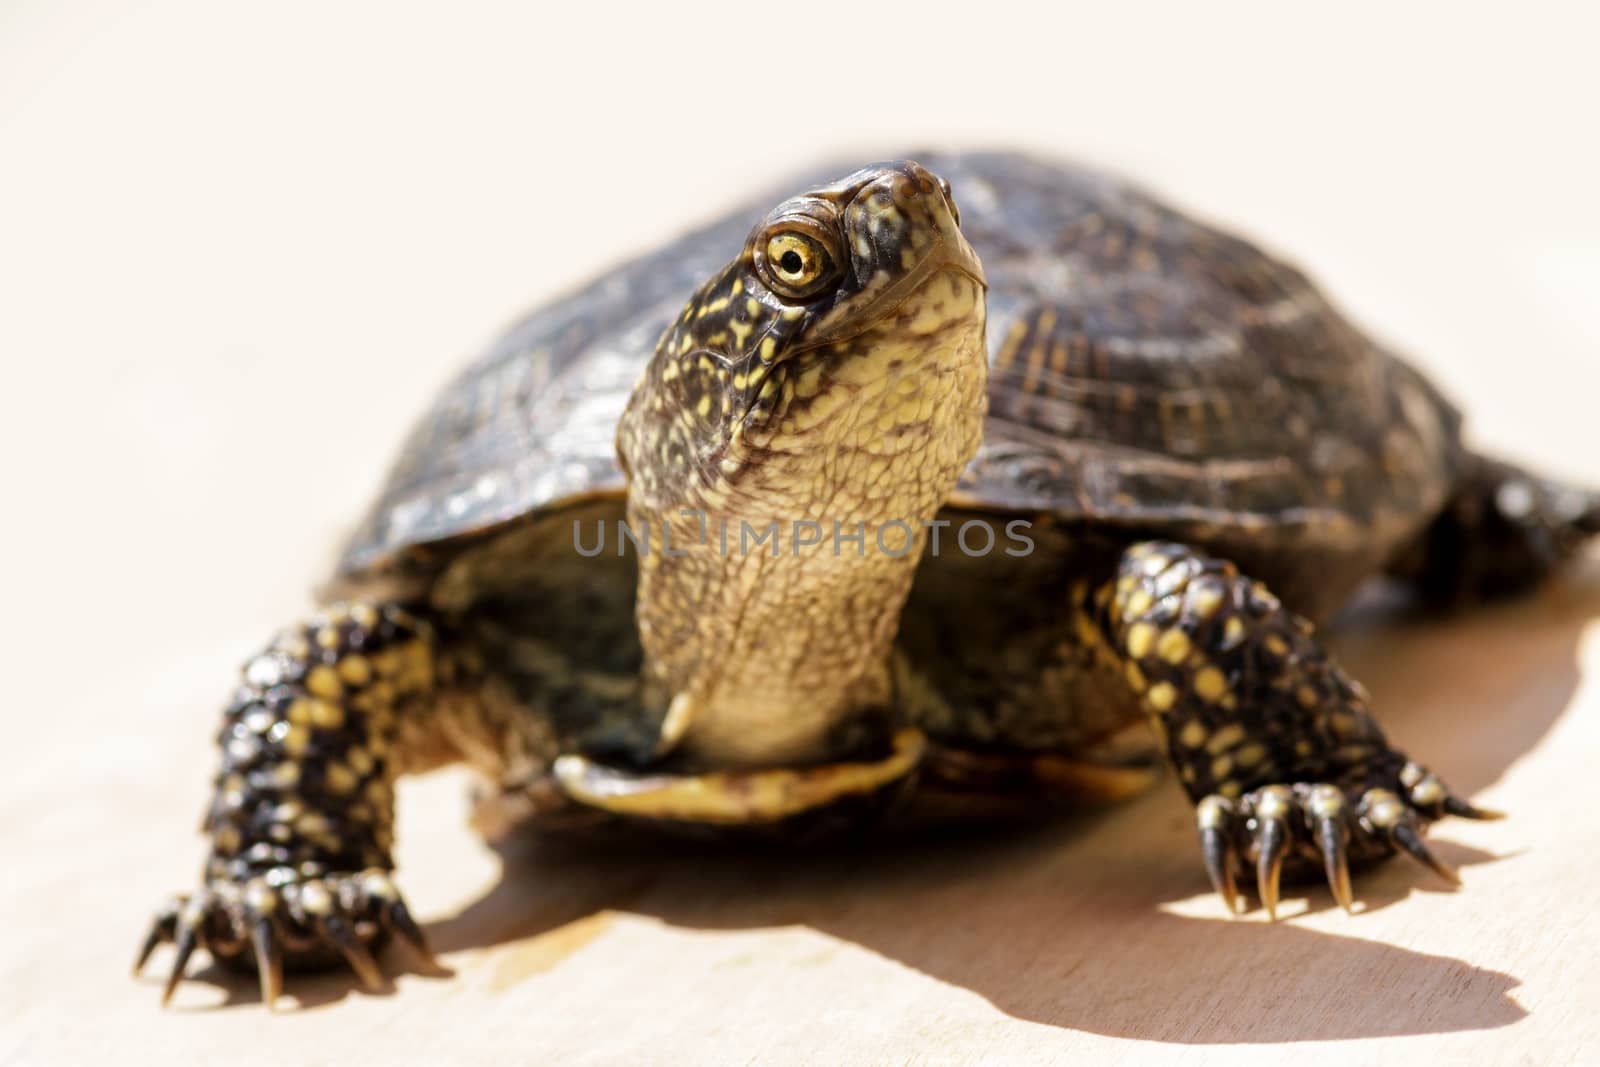 Tortoise climbed out of the shell and crawled along an even surface. Close-up, focus on head.